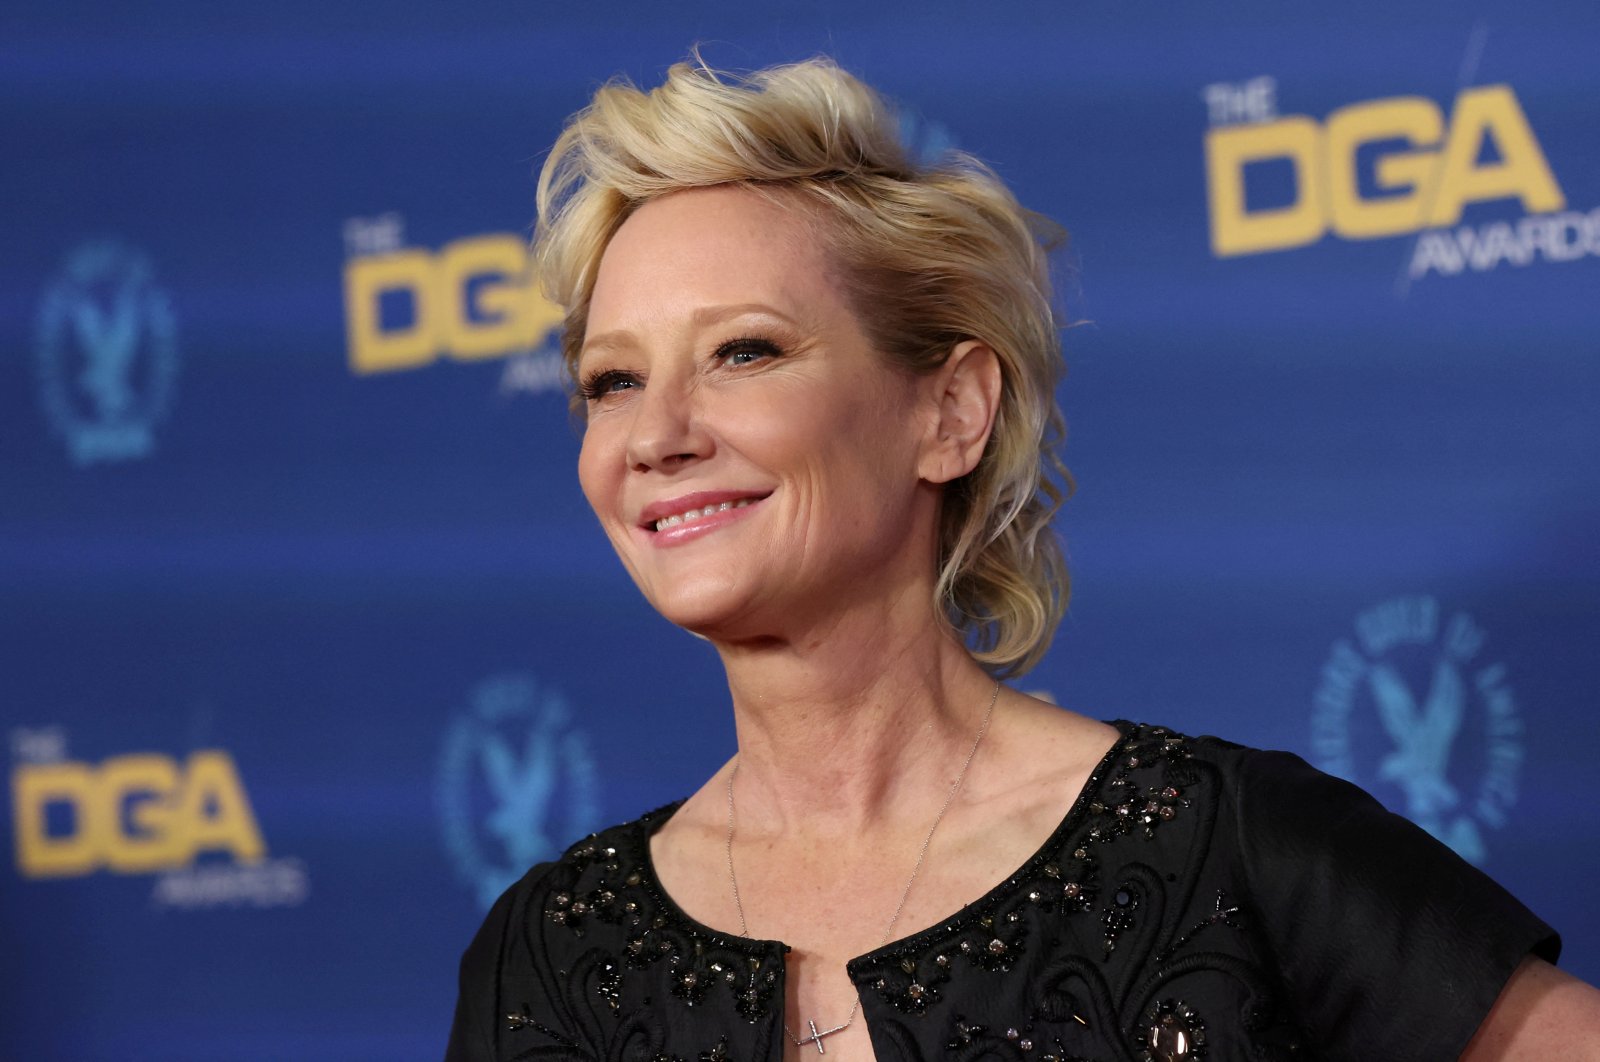 Anne Heche has been in a coma since the car accident and has lost consciousness